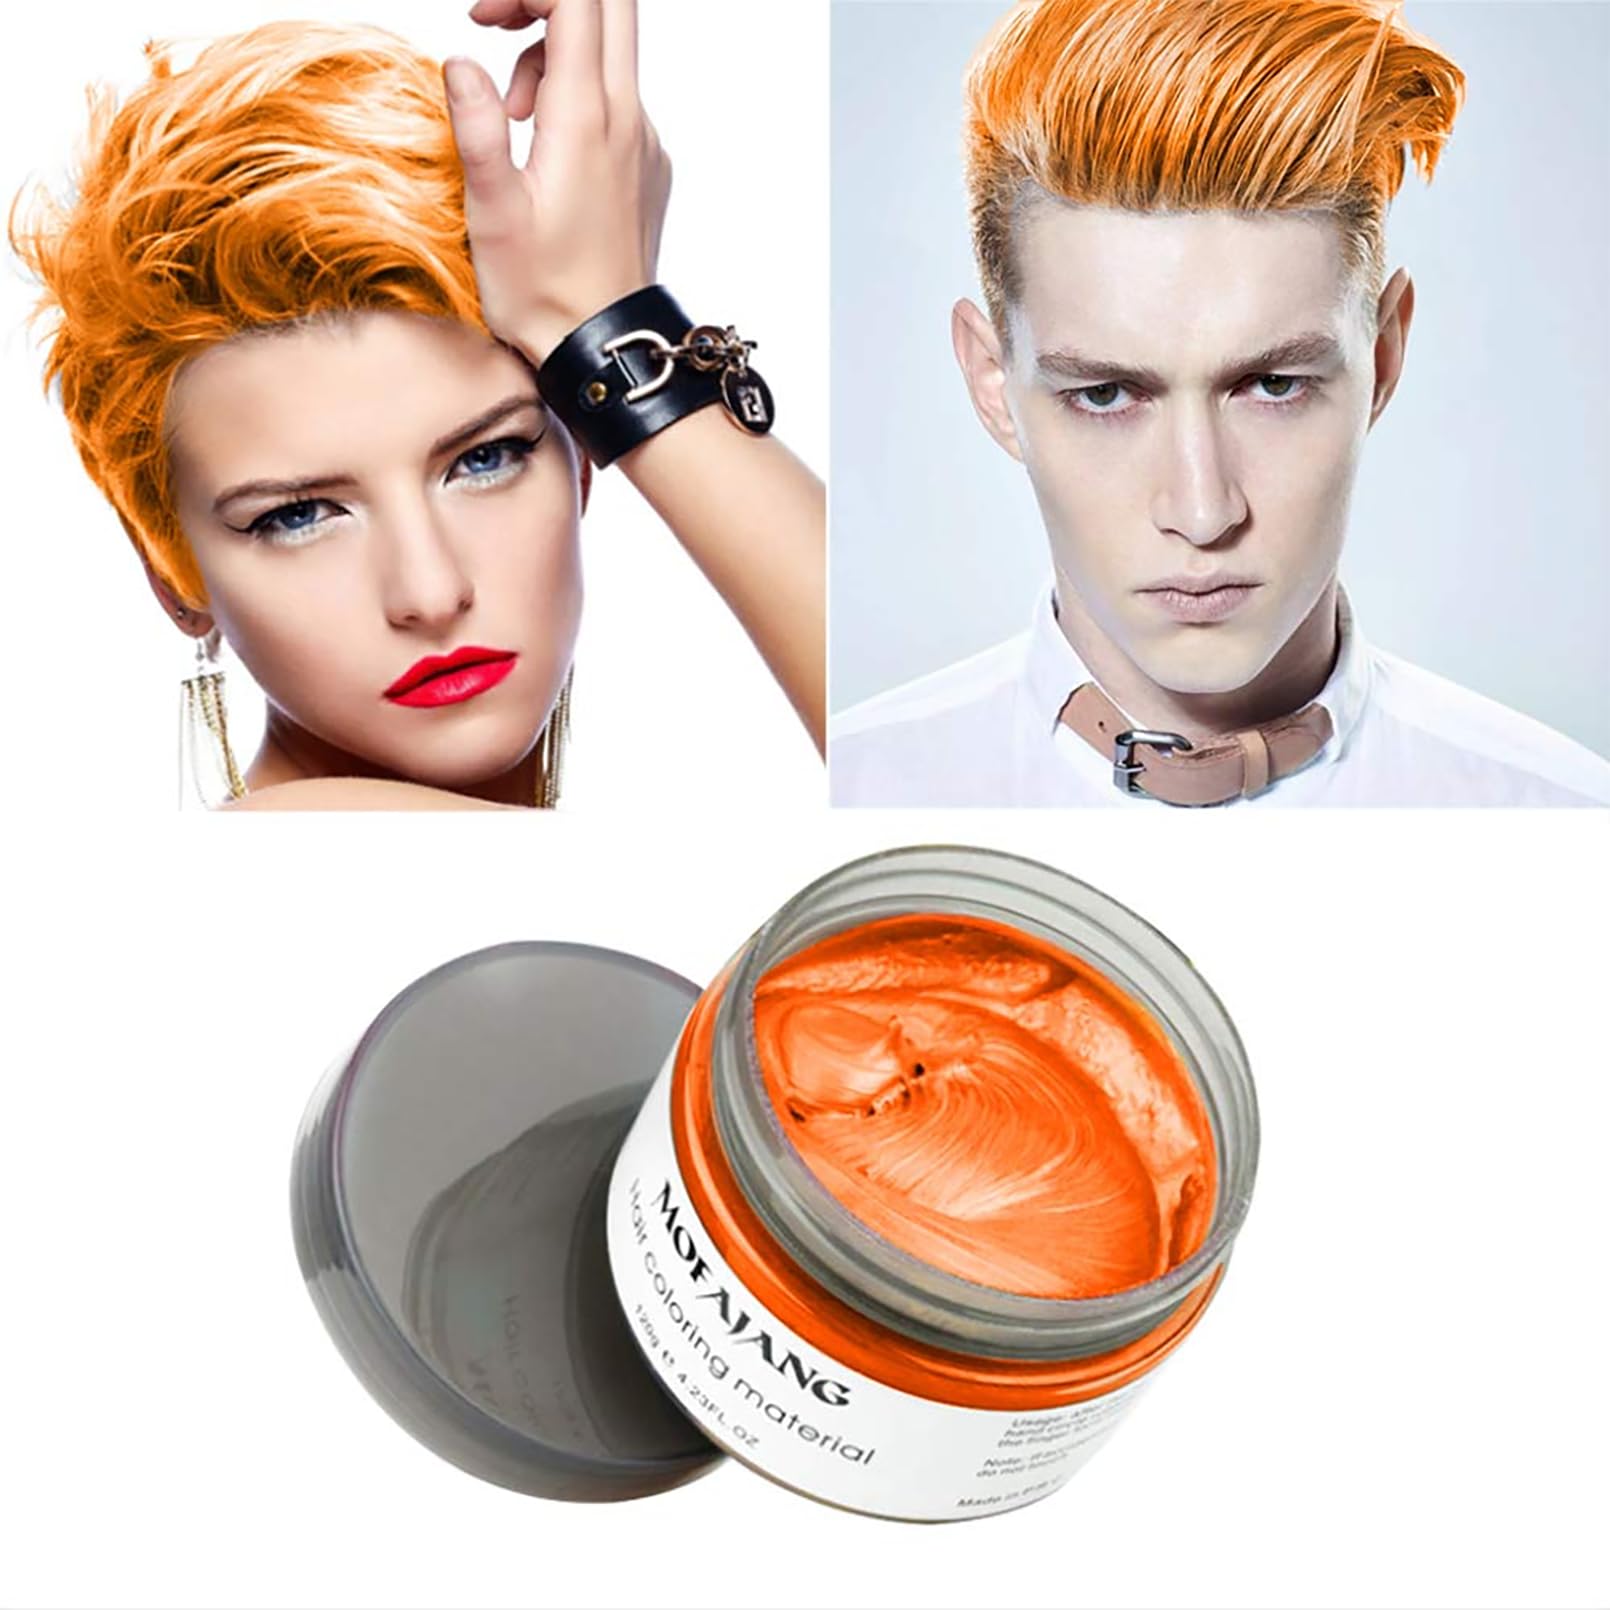 Orange Hair Color Wax, SOVONCARE Temporary Natural Hairstyle Cream for Women & Men Kids Halloween Cosplay and Date 4.23 oz (Orange)